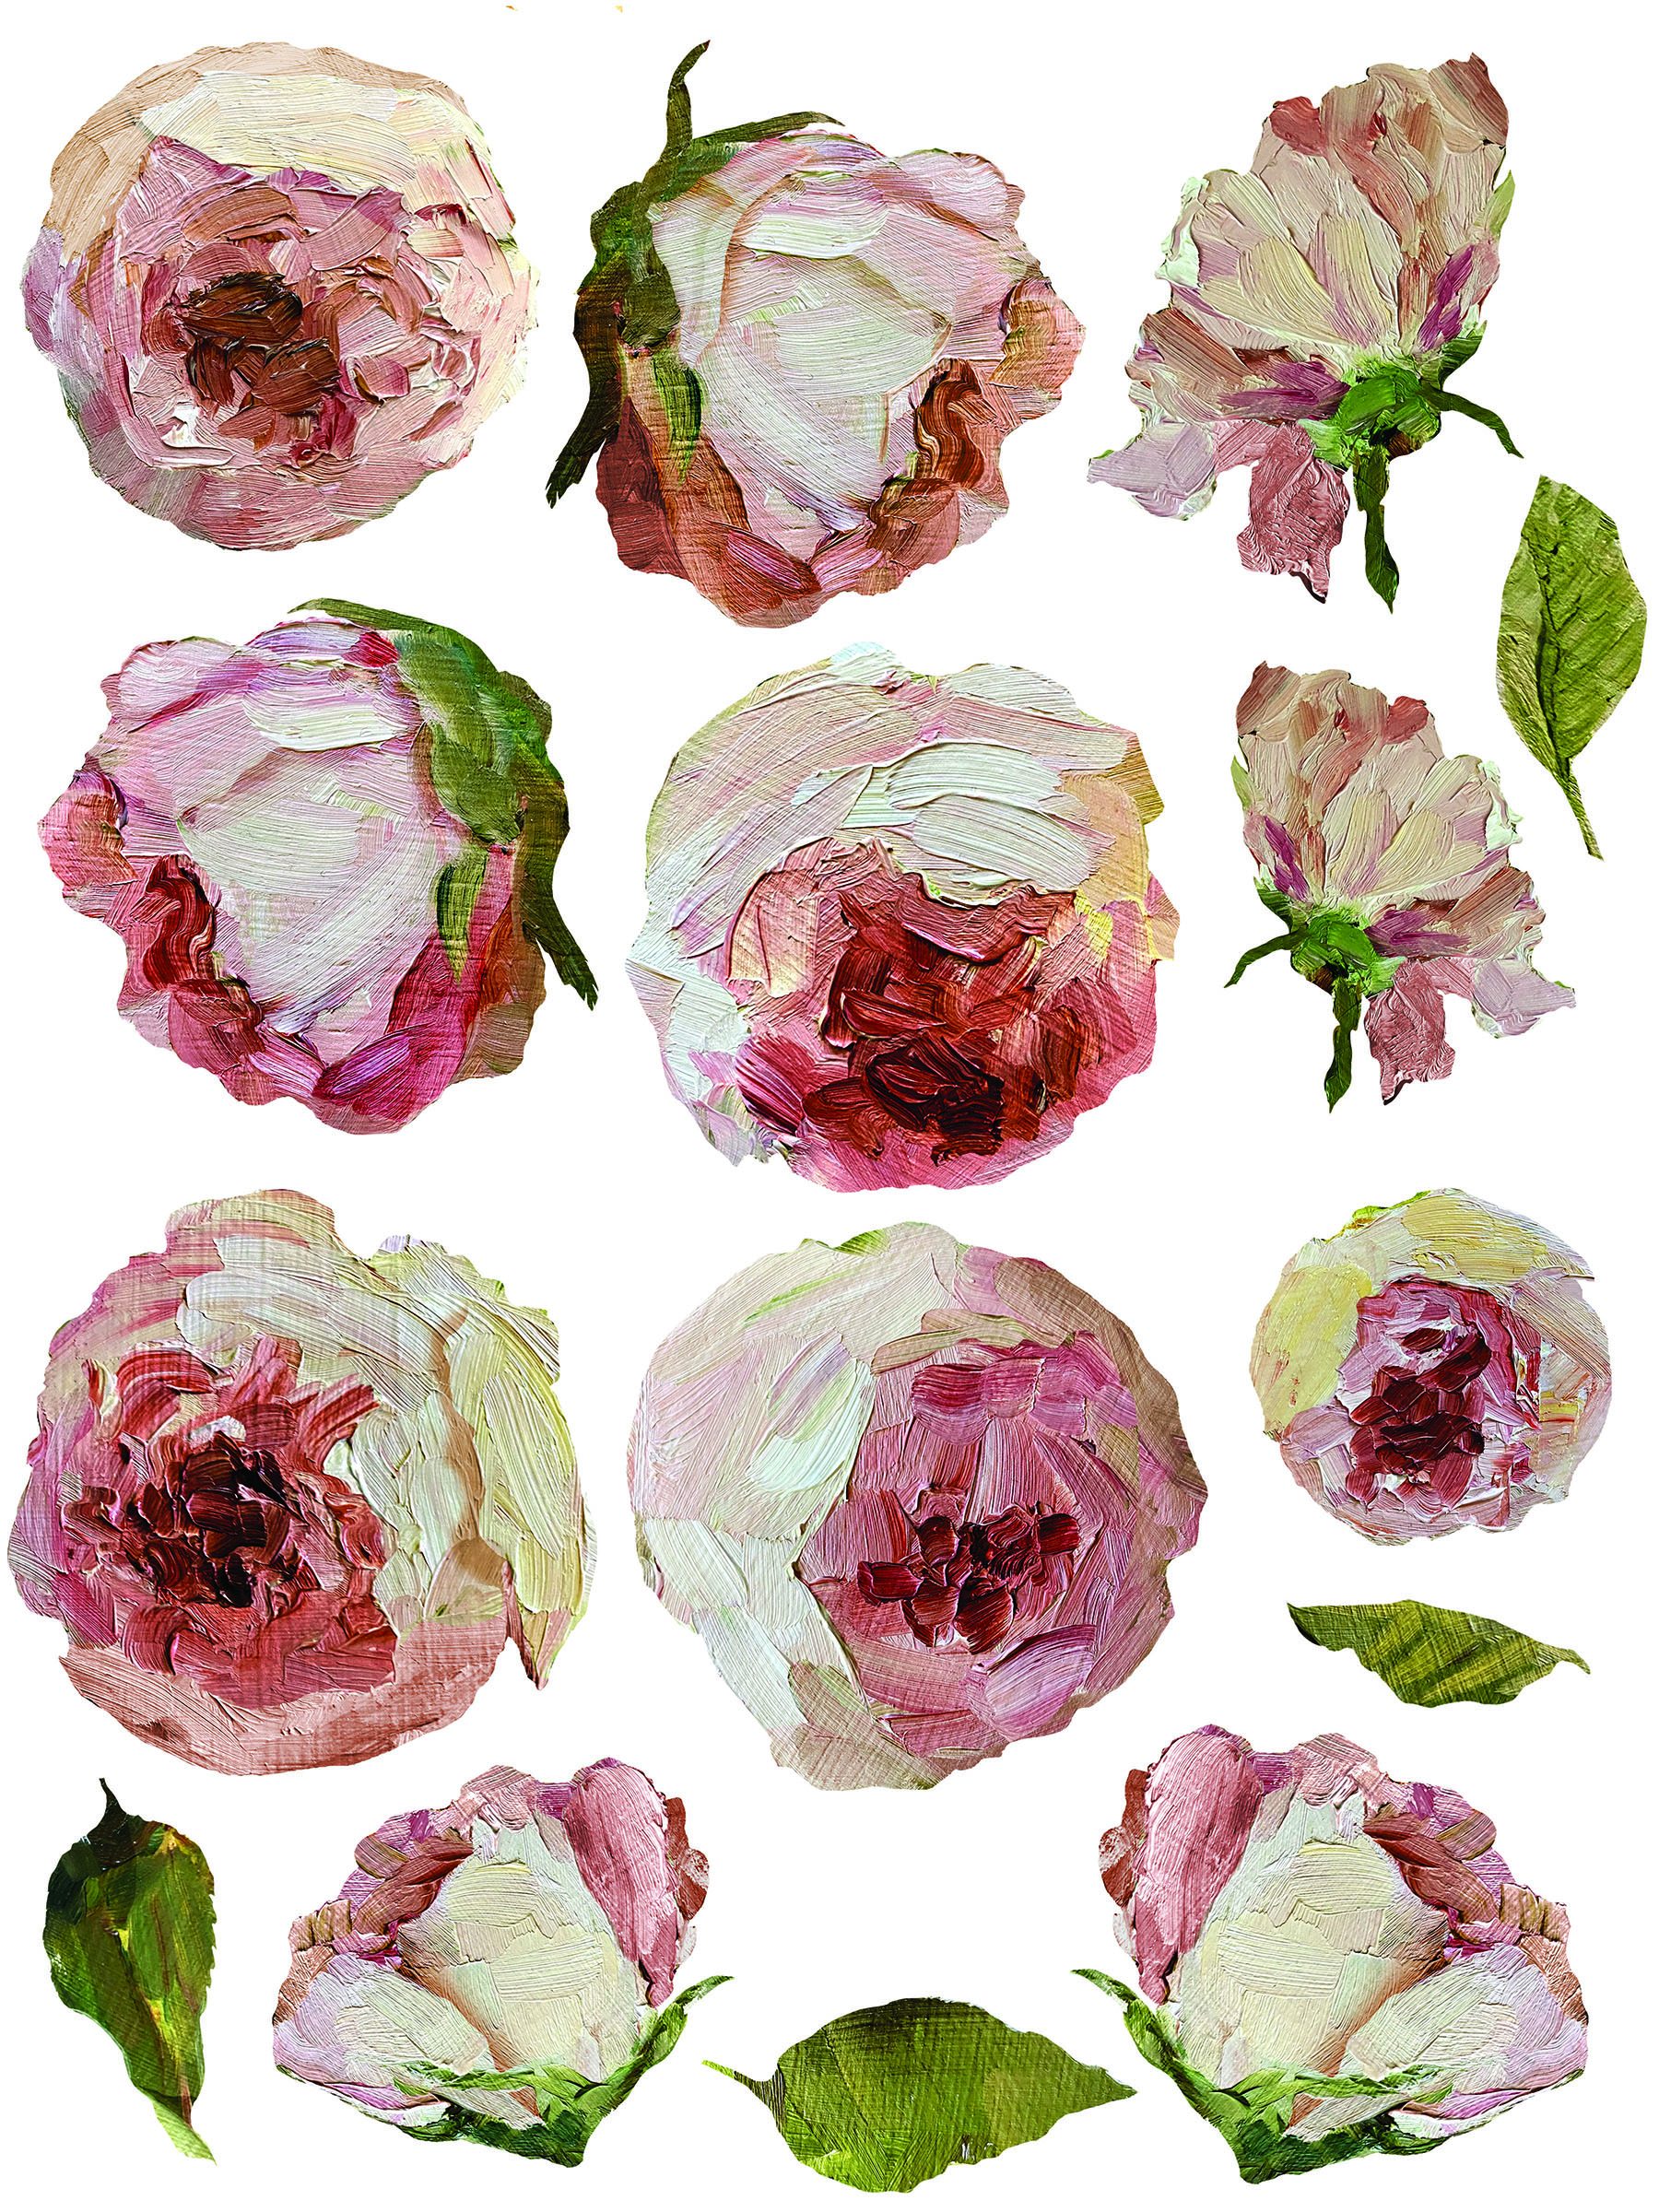 IOD Transfer Painterly Floral